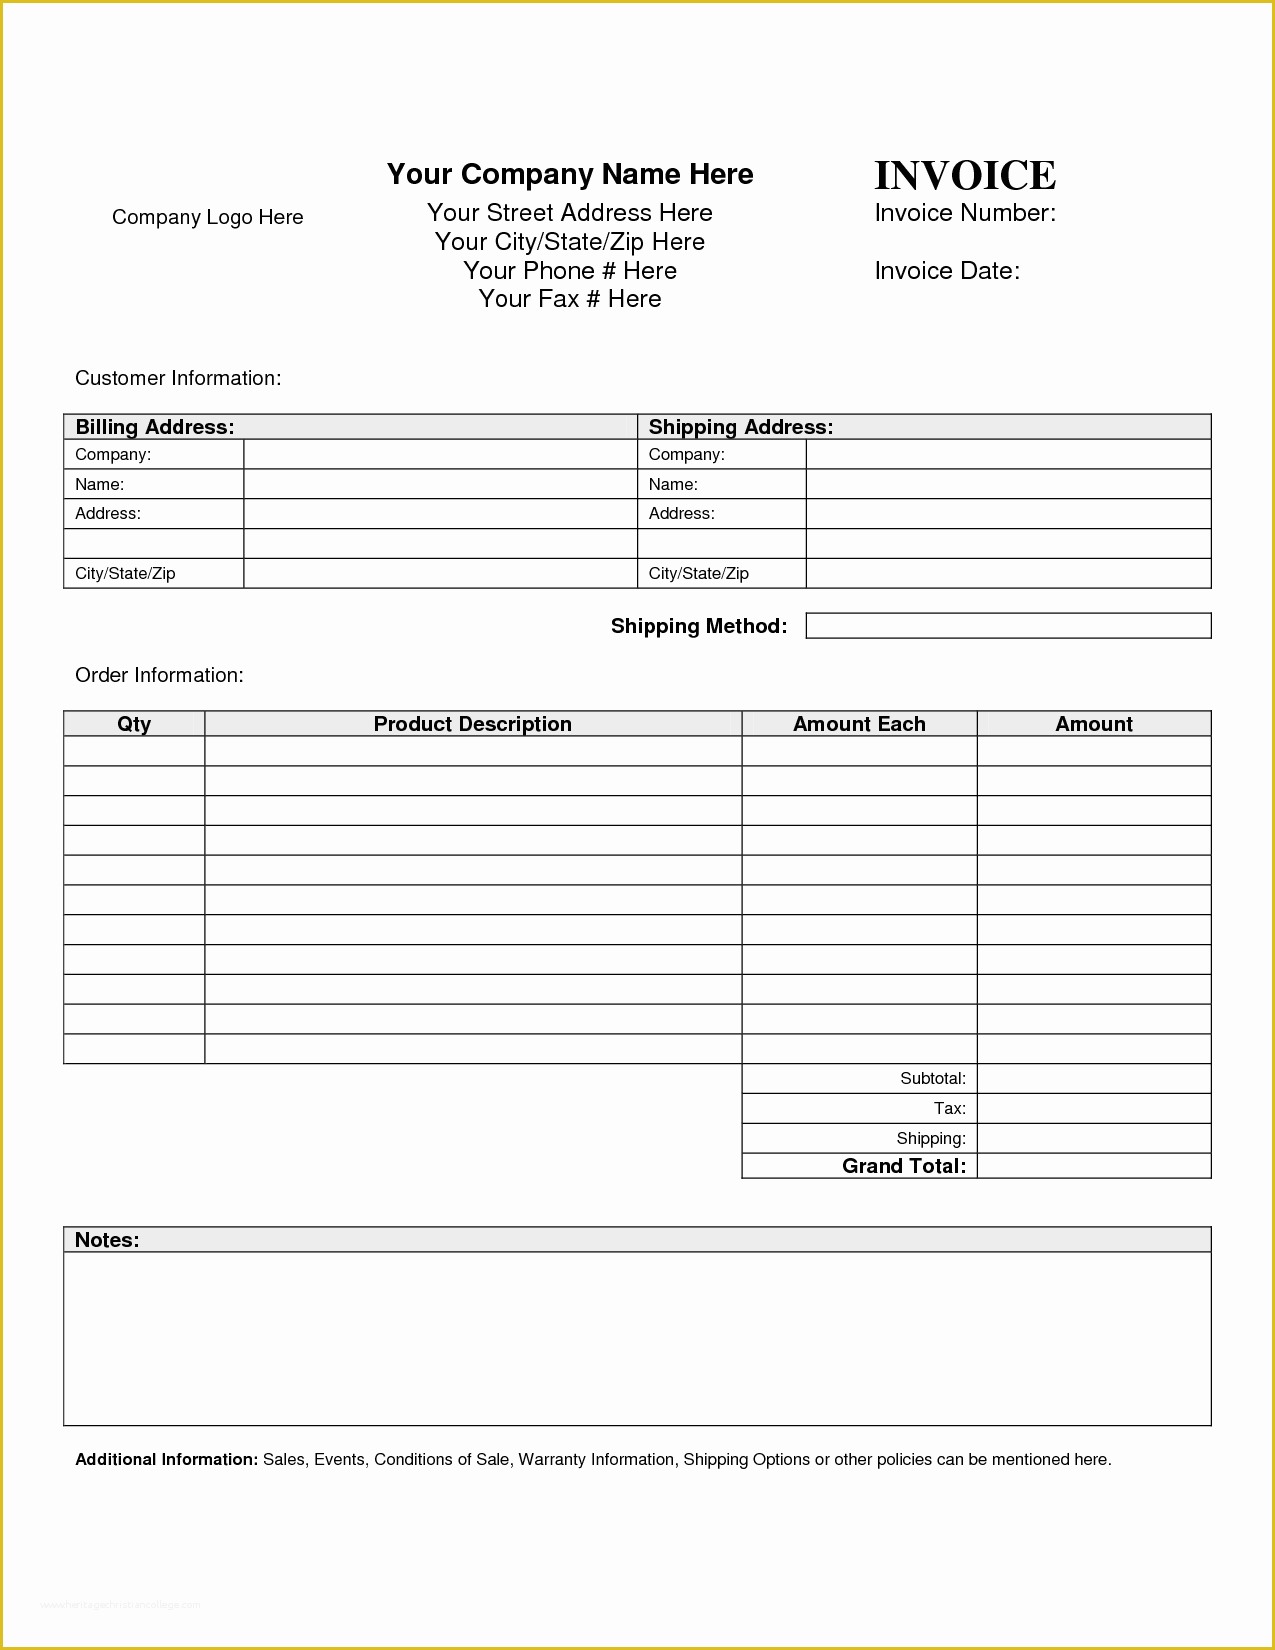 Free Company Invoice Template Of Billing Invoice Template Free